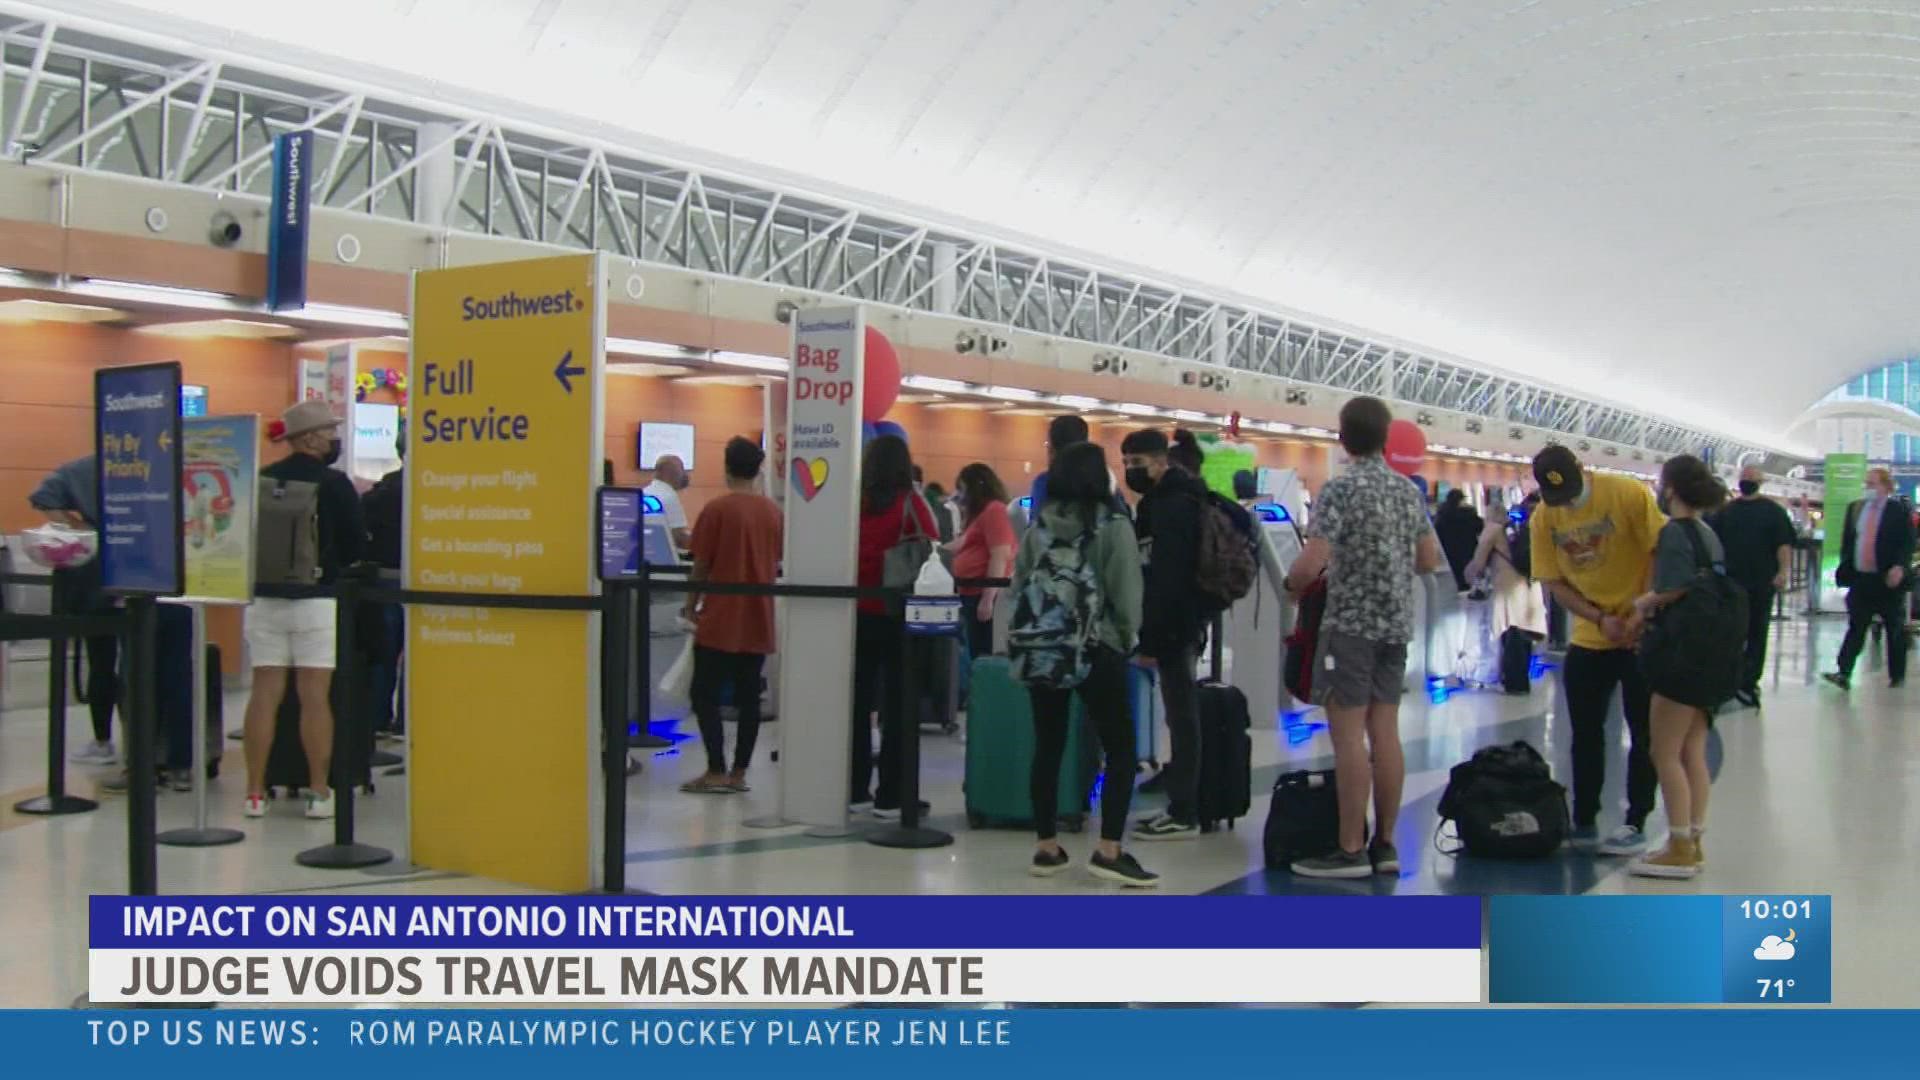 The airport said the TSA will not enforce a mask mandate, and some airlines will make masks optional, though they are strongly recommended.